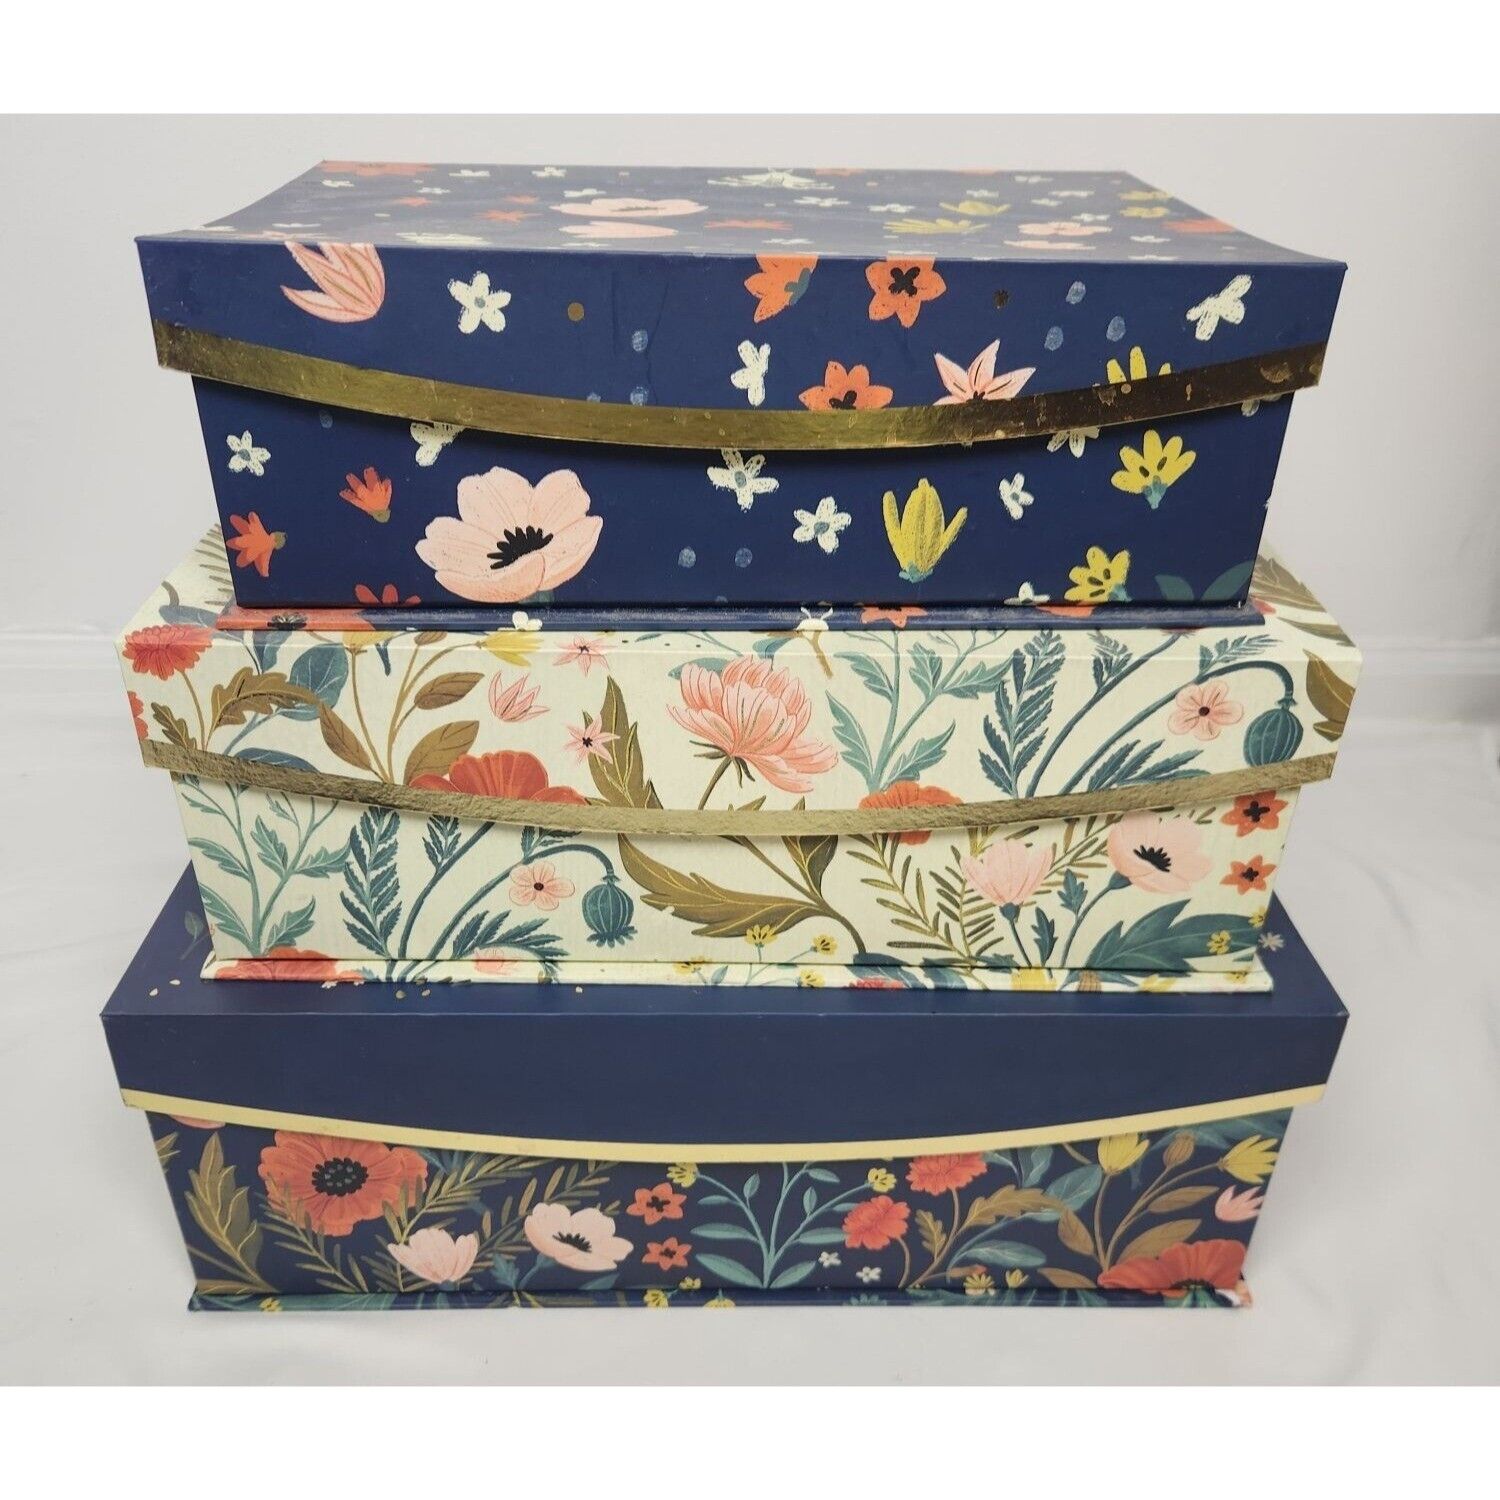 Janelle Penner Wild Apples Floral 3 Piece Nesting Boxes